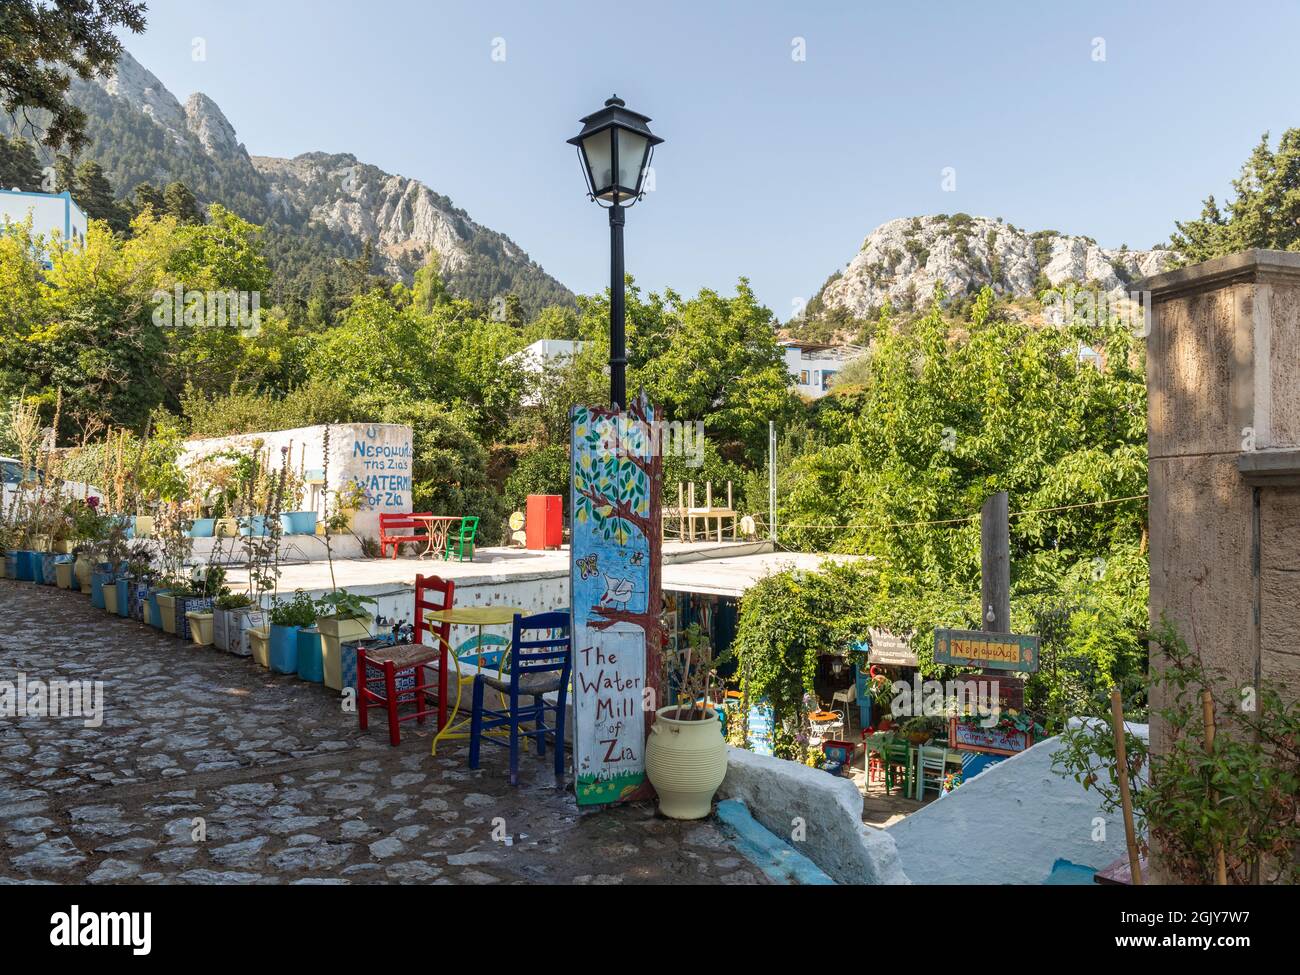 The Watermill is a picturesque traditional Greek café in the mountain village of Zia in Kos, Dodecanese Island, Greece Stock Photo